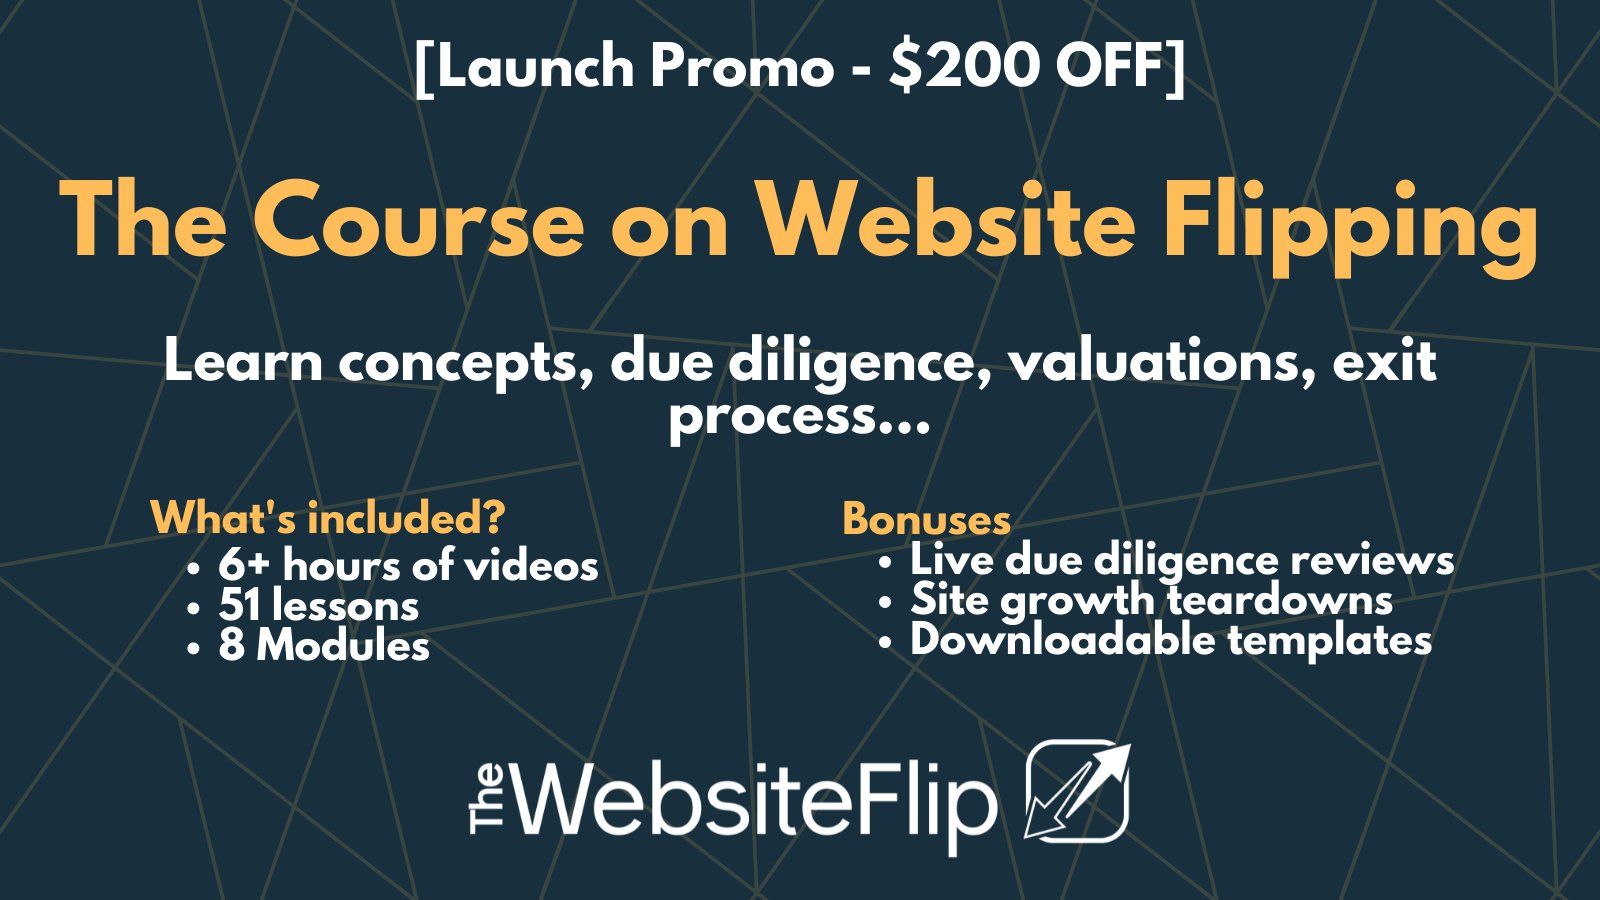 Mushfiq from The Website Flip – The Course on Website Flipping at Midlibrary.net